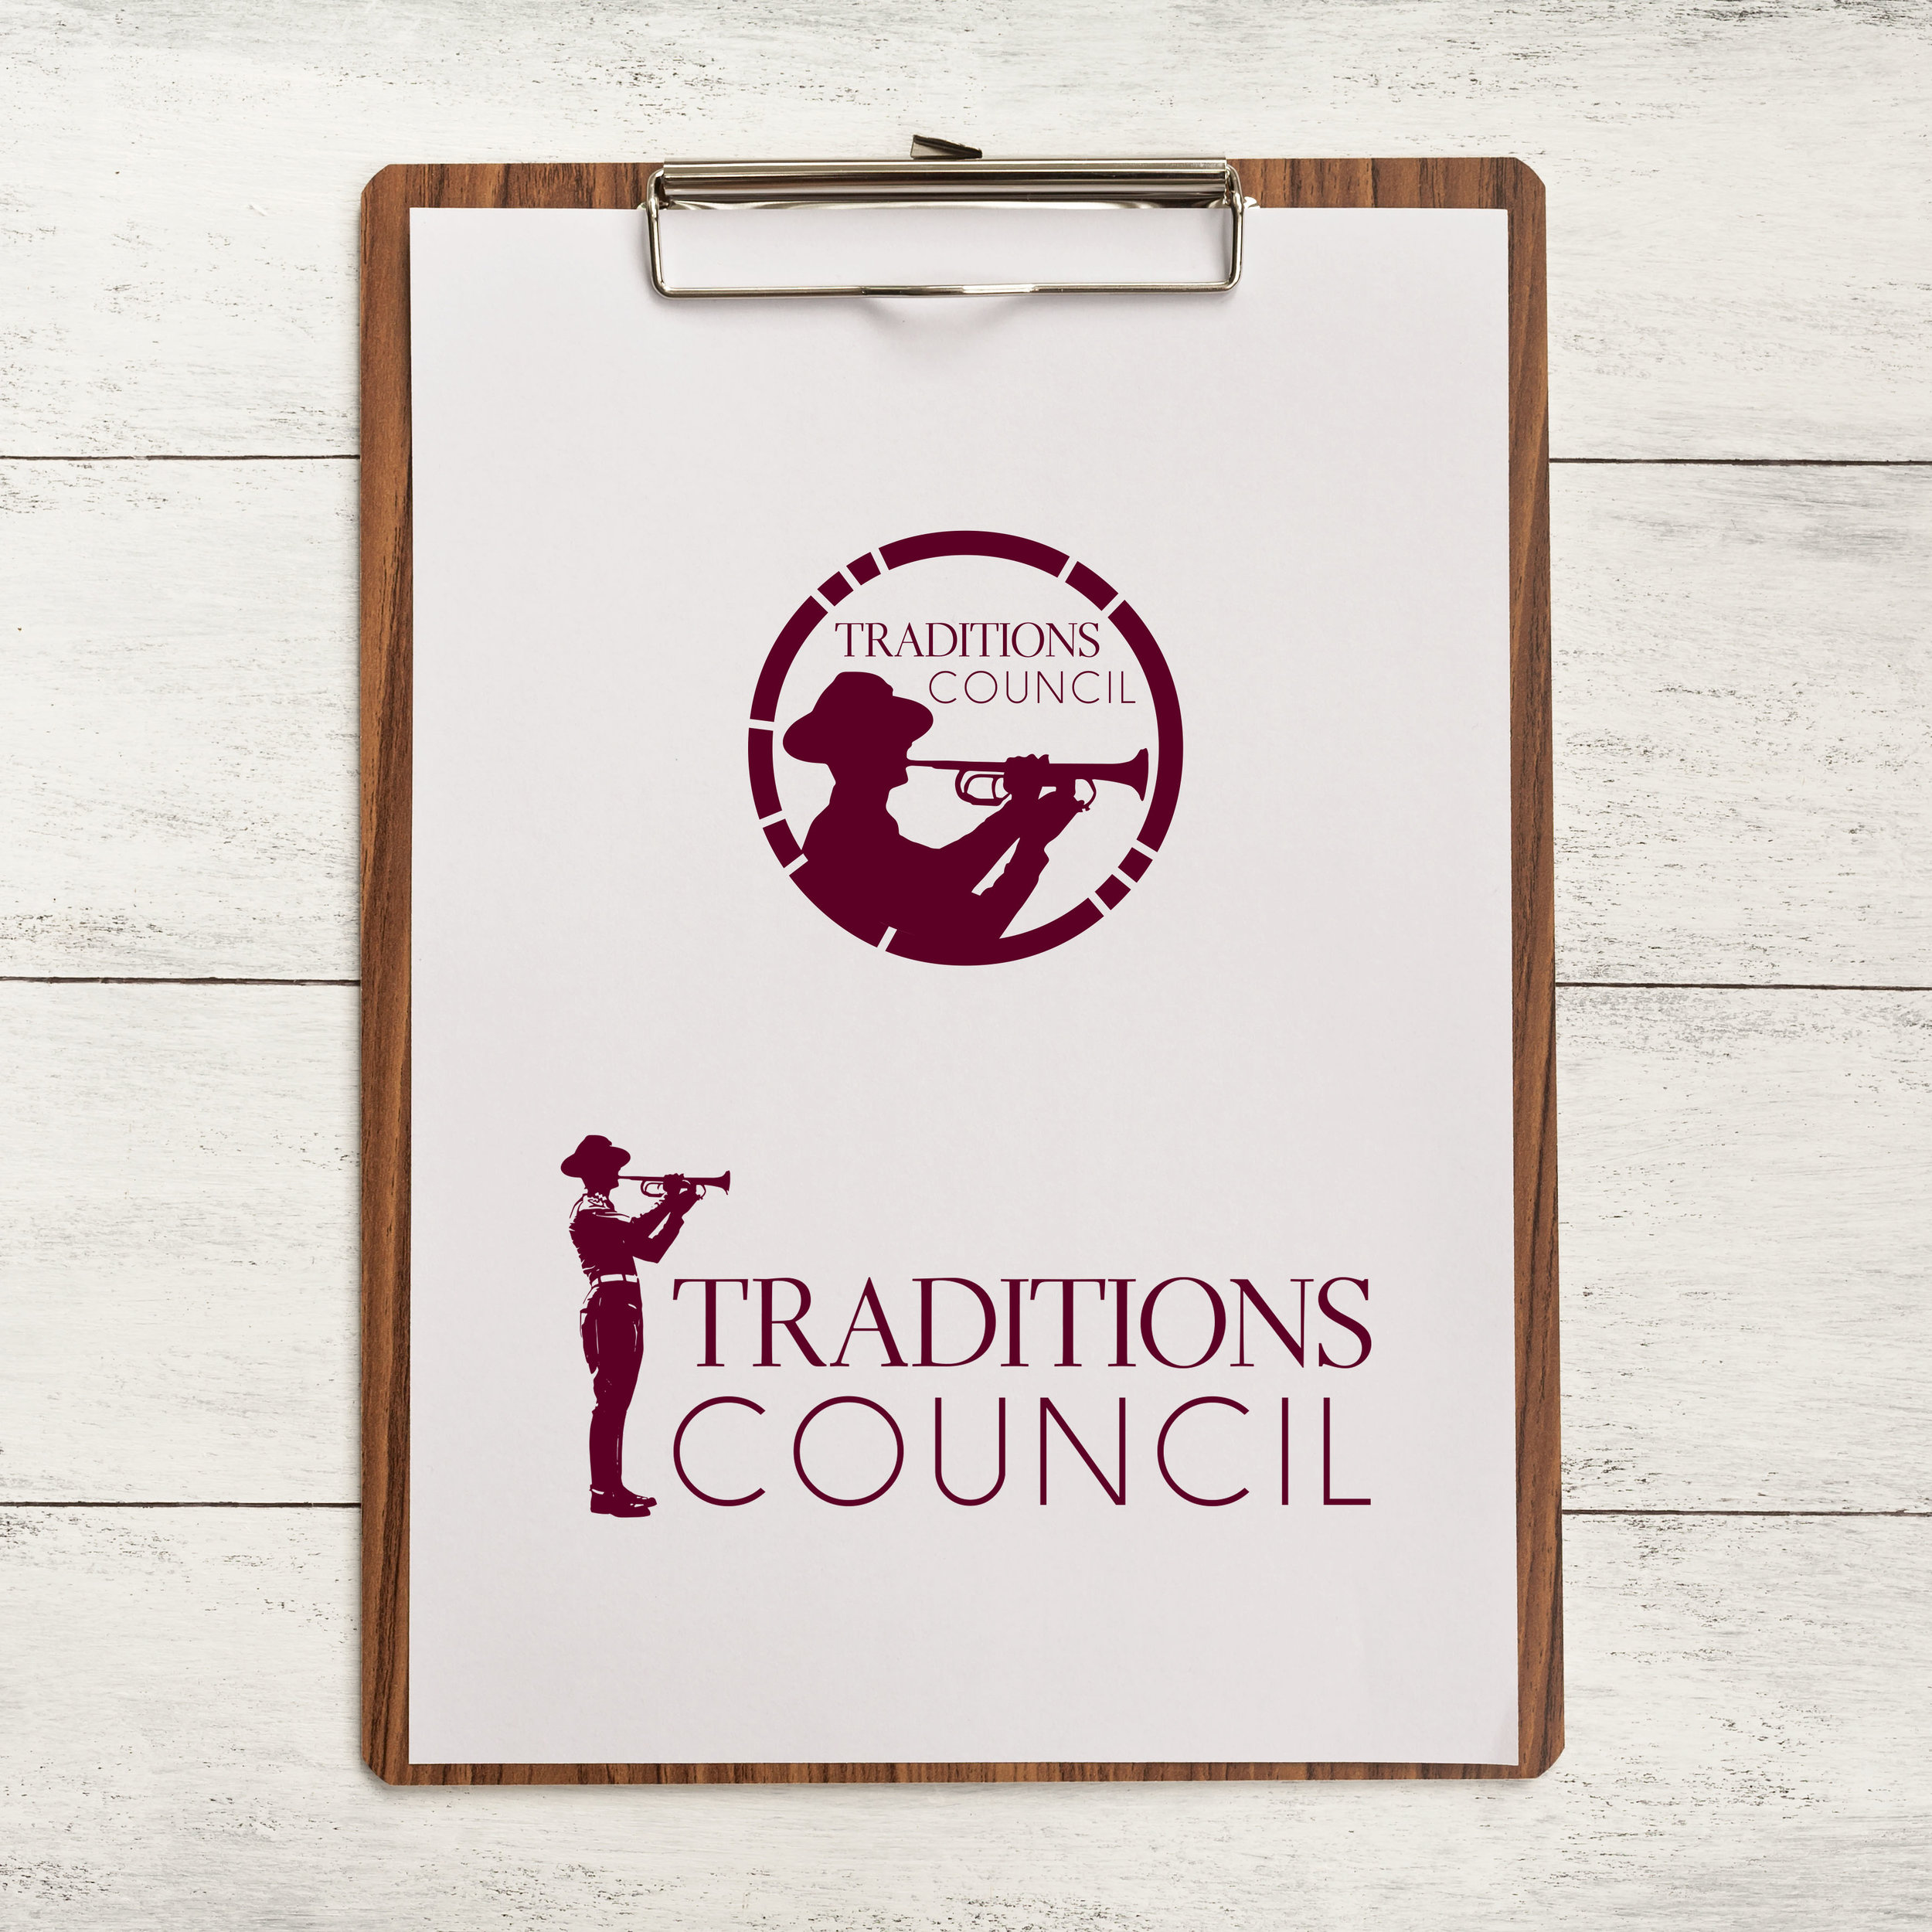 Traditions Council.jpg